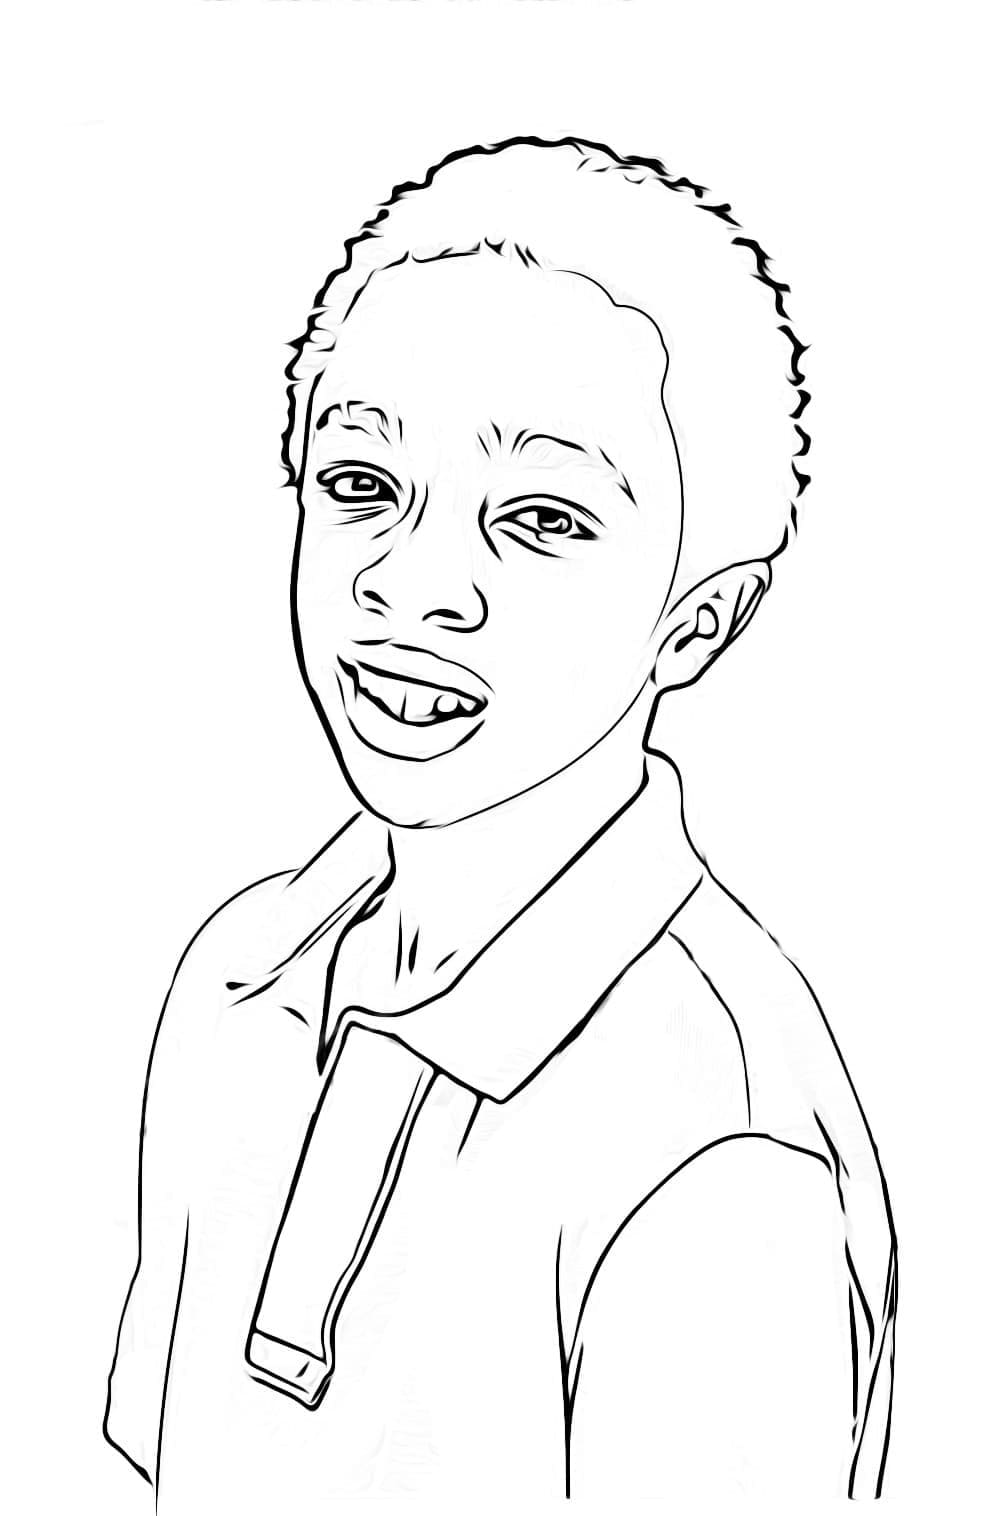 Lucas sinclair from stranger things coloring page